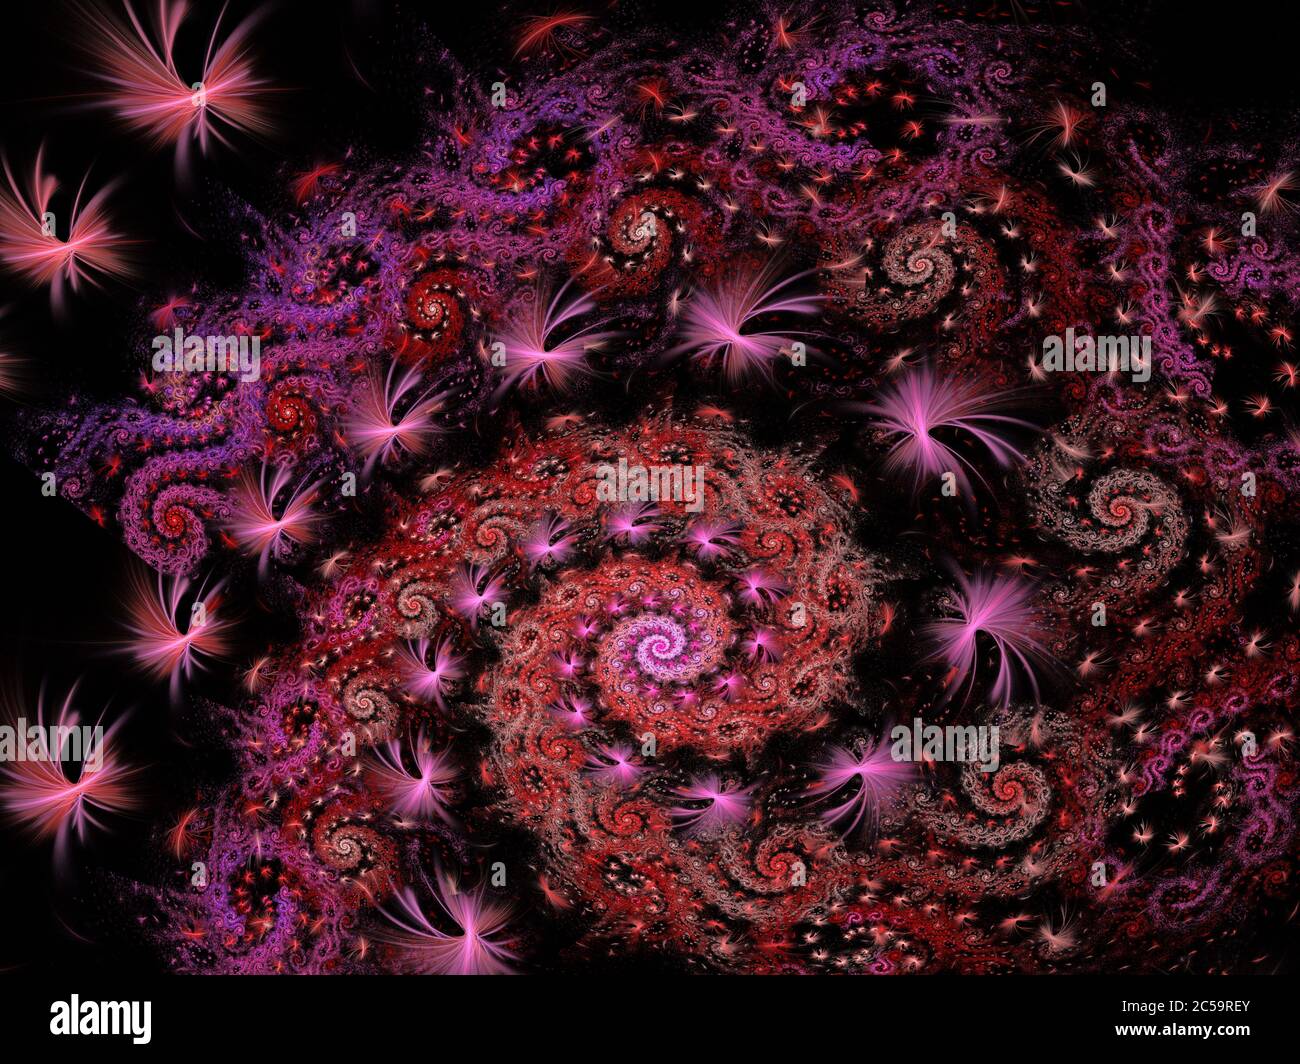 Pink Feathers Incorporated In Spiral Flame Fractal Design Stockfoto